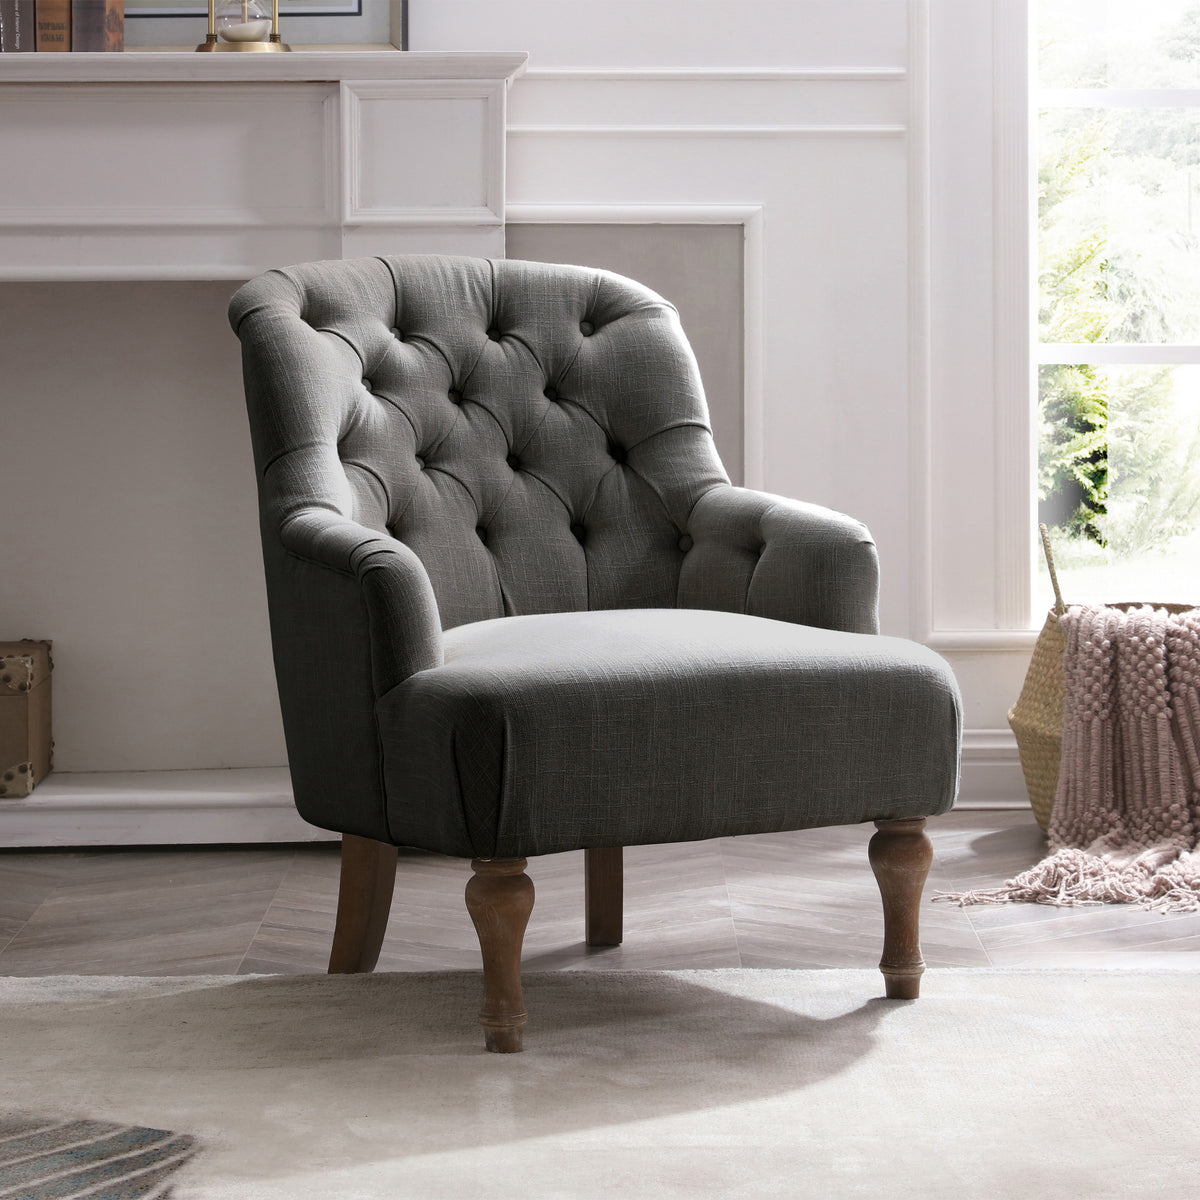 Charcoal Linen Fabric Bianca Armchair Lifestyle